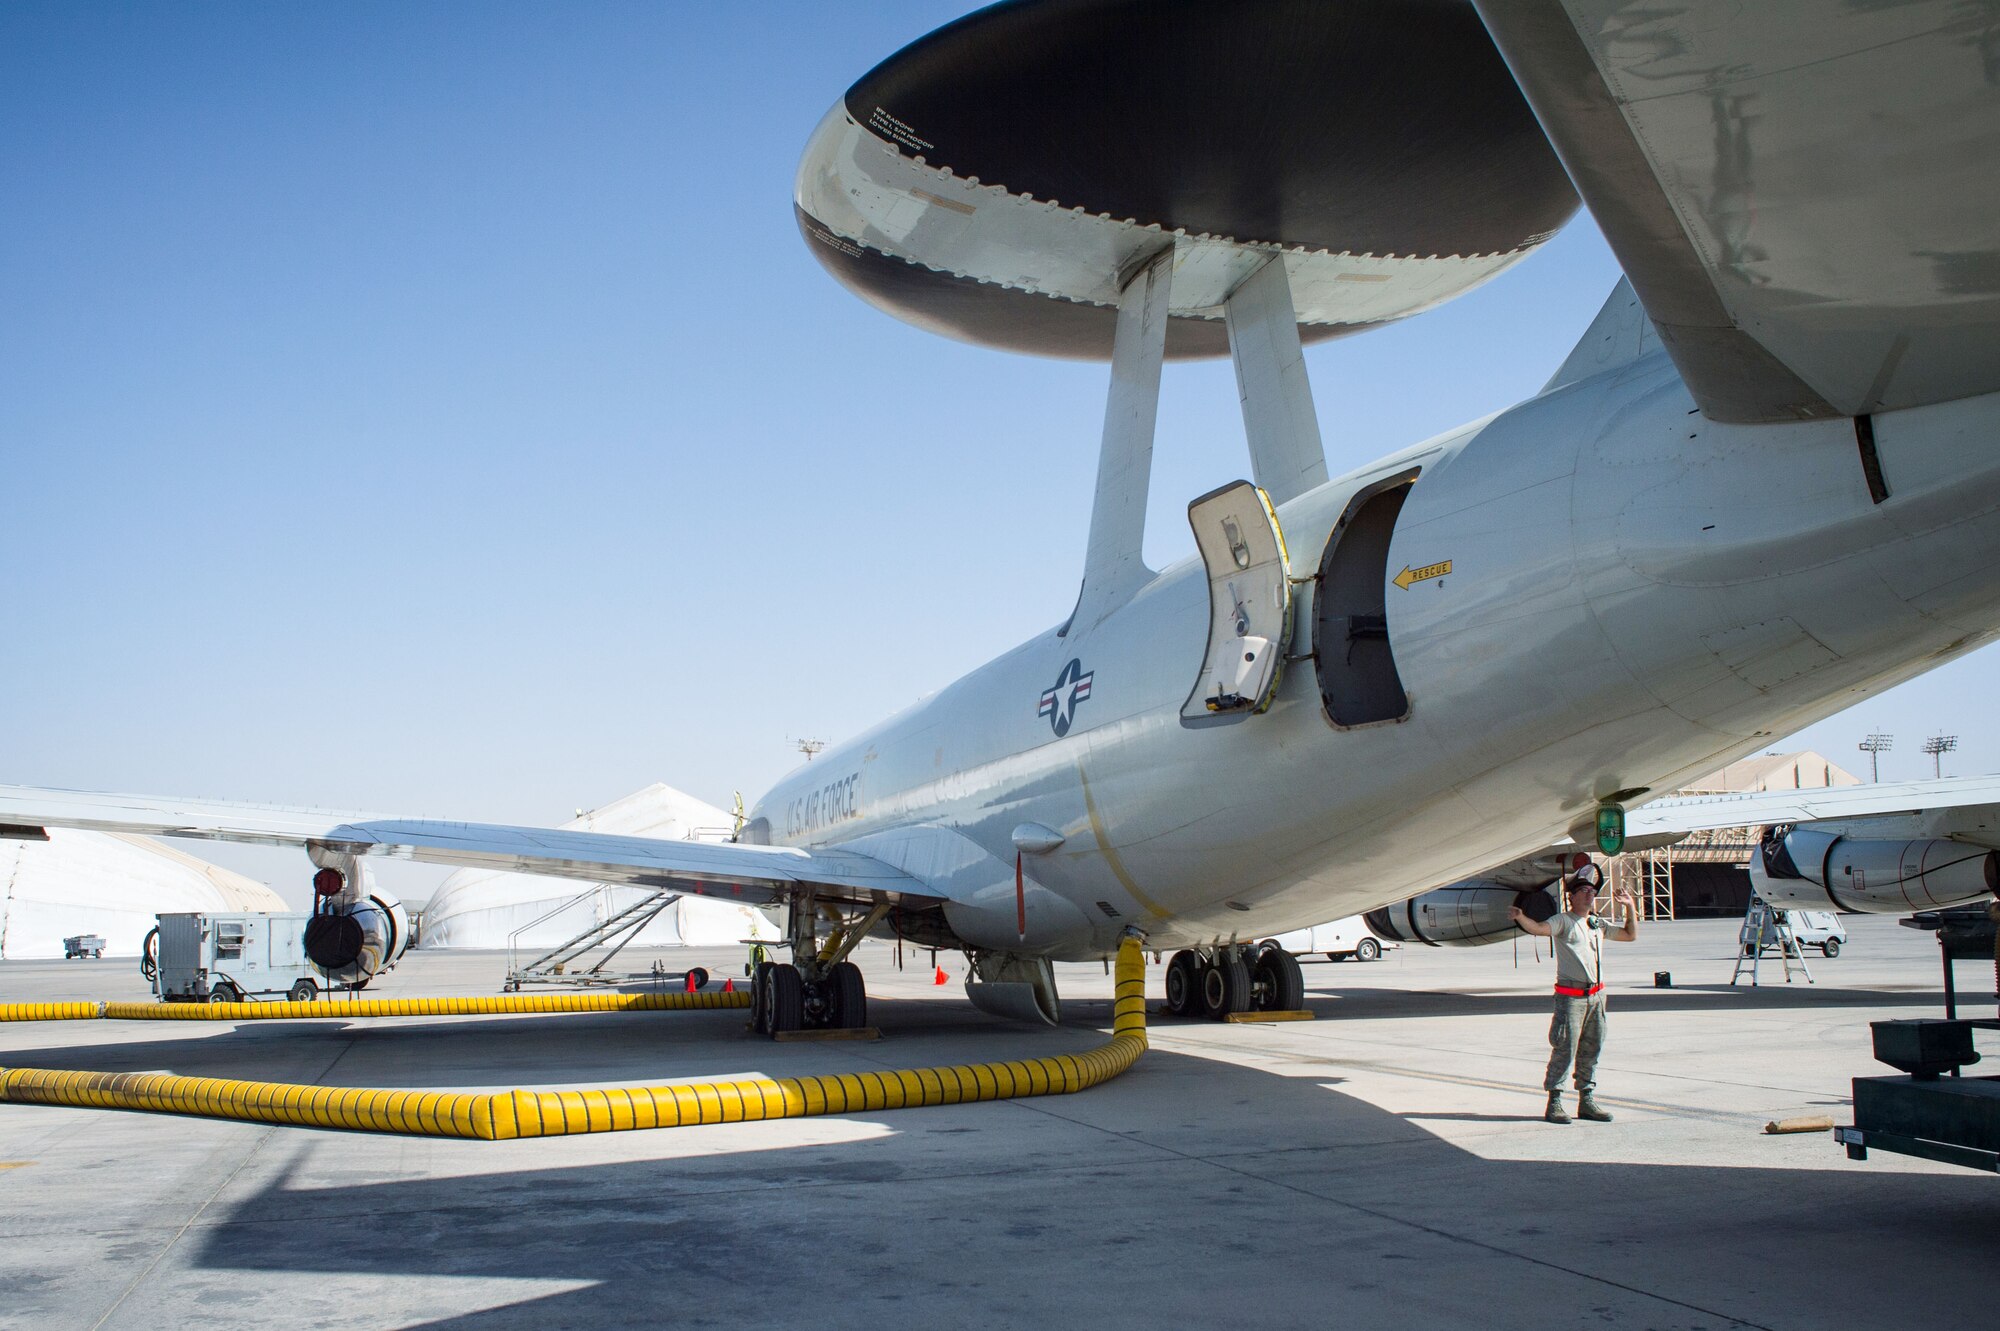 380th Expeditionary Aircraft Maintenance Squadron Airmen complete post-flight inspections on an E-3 Sentry at an undisclosed location in Southwest Asia, Feb. 2, 2017. To date, the E-3 Sentry has completed more than 10,000 hours of flight time in support of Combined Joint Task Force-Operation Inherent Resolve. (U.S. Air Force photo by Senior Airman Tyler Woodward)